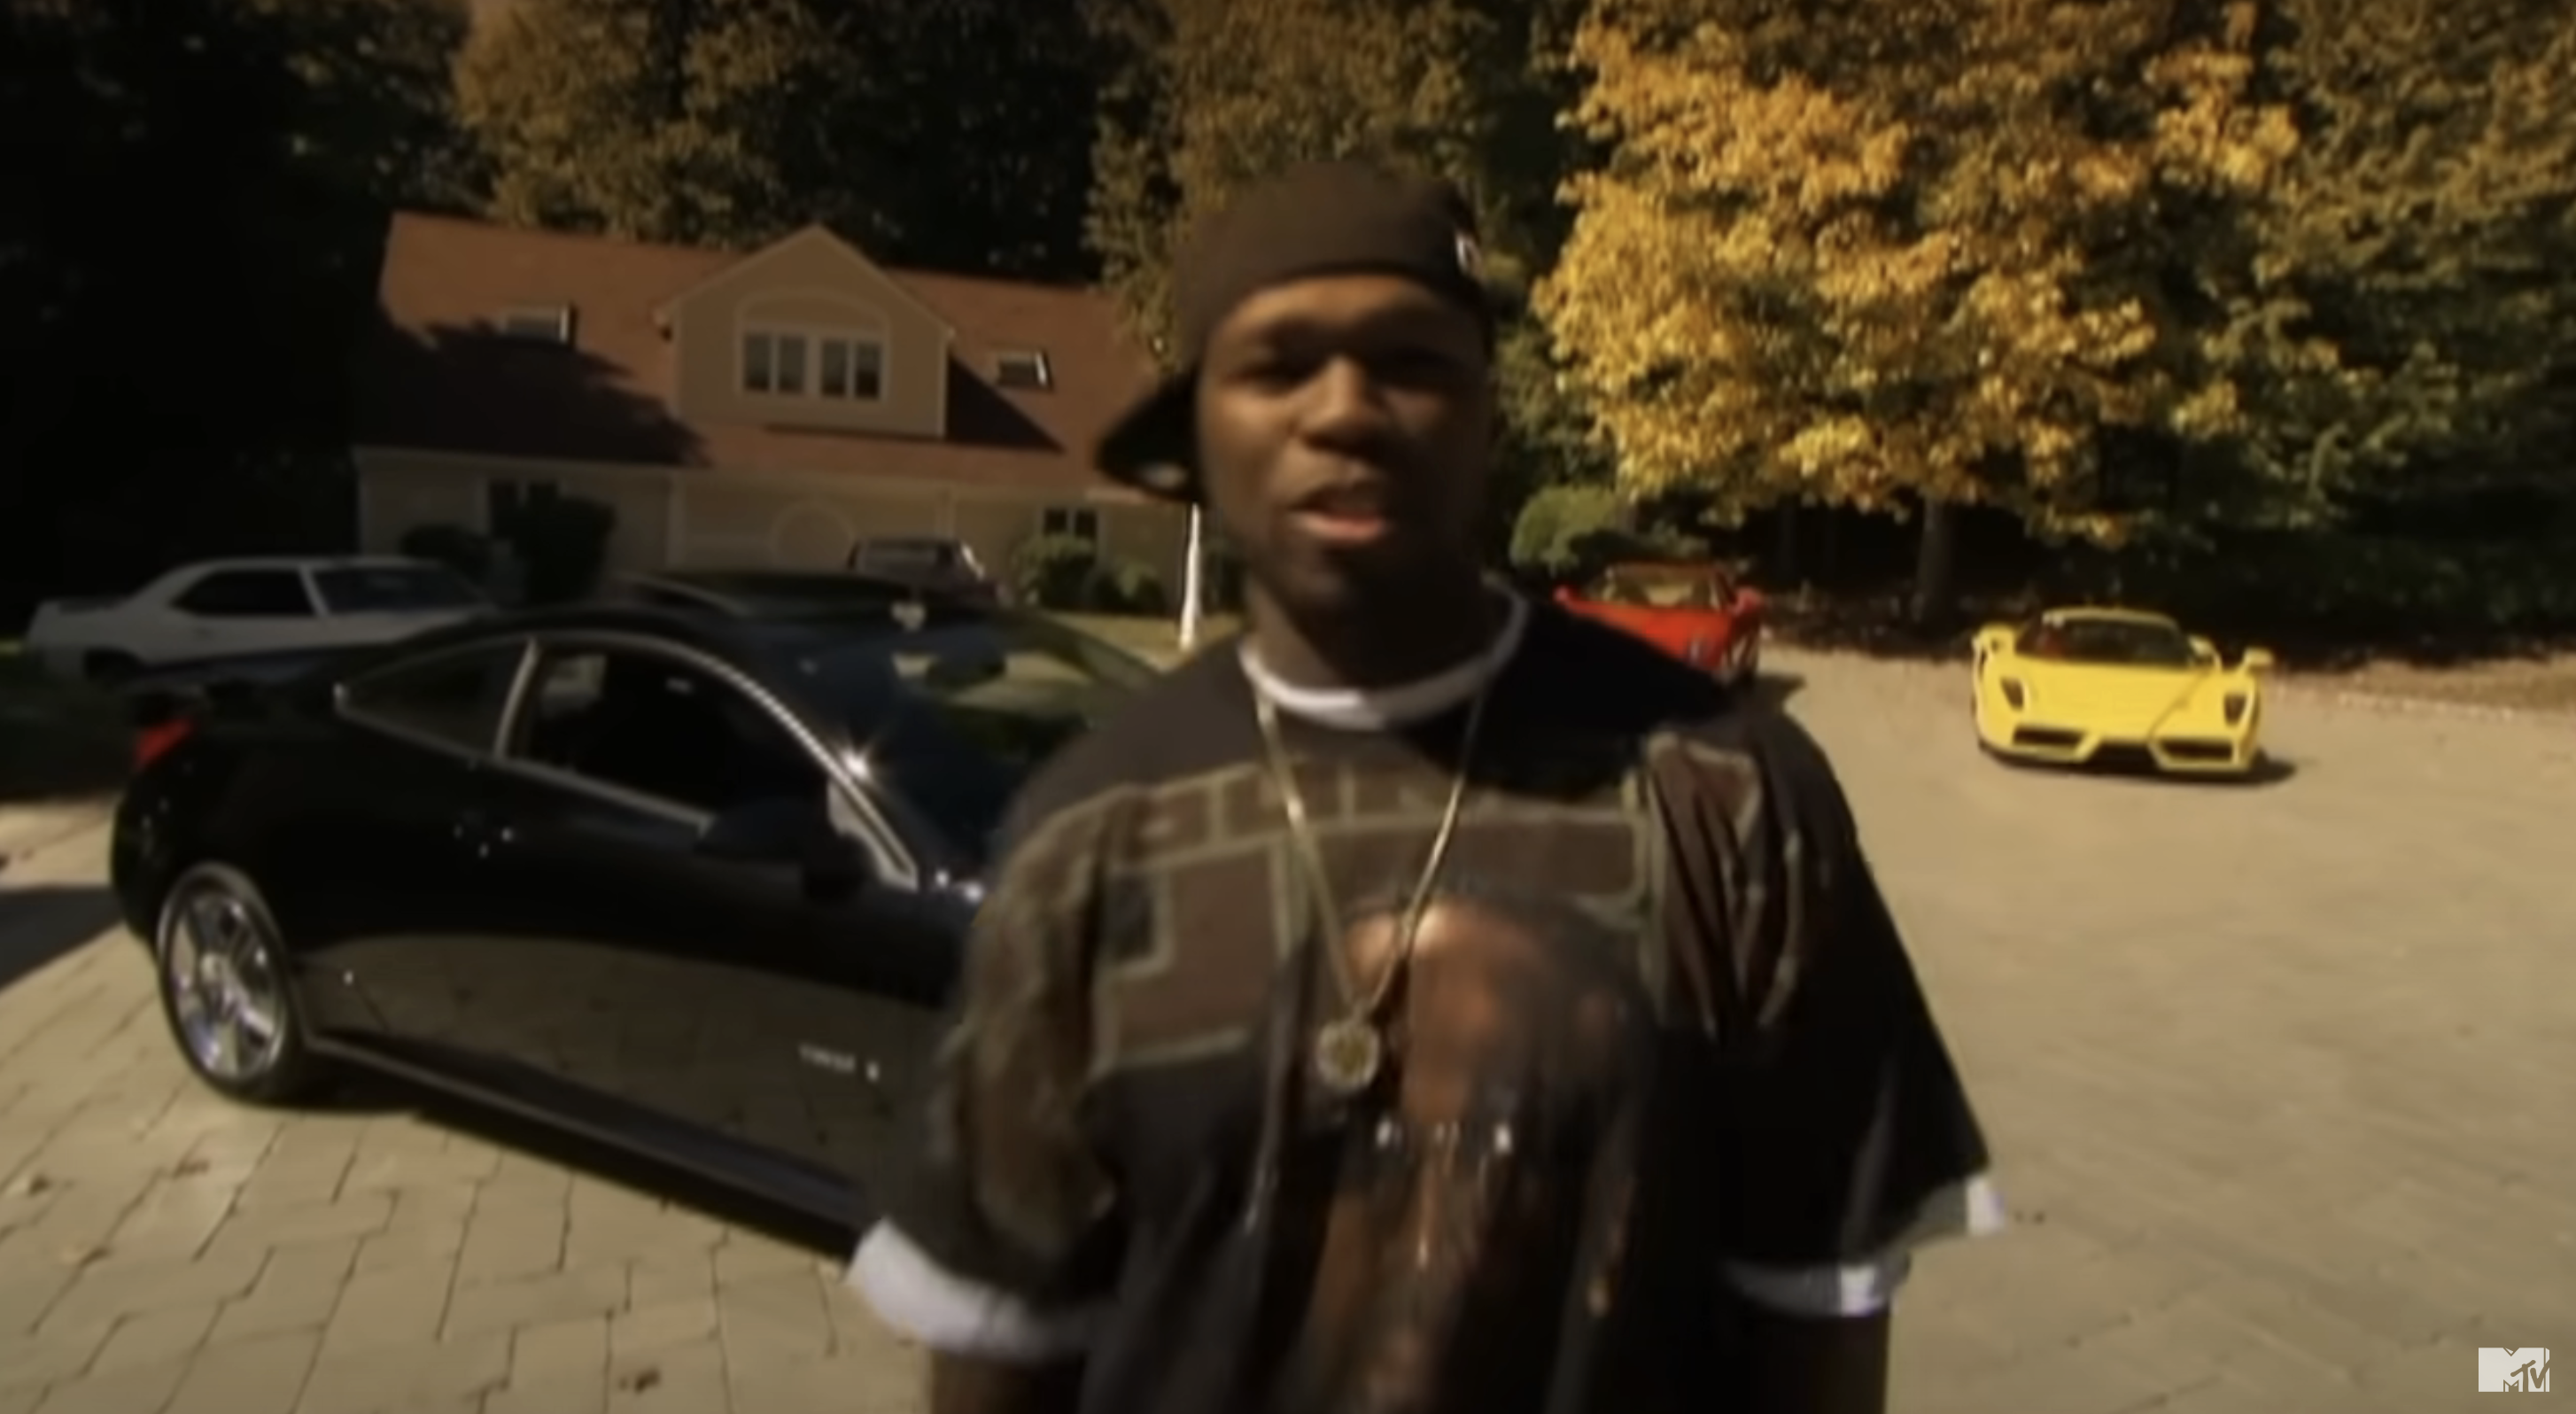 50 Cent standing by a car, wearing a cap and graphic tee, with two sports cars in the background